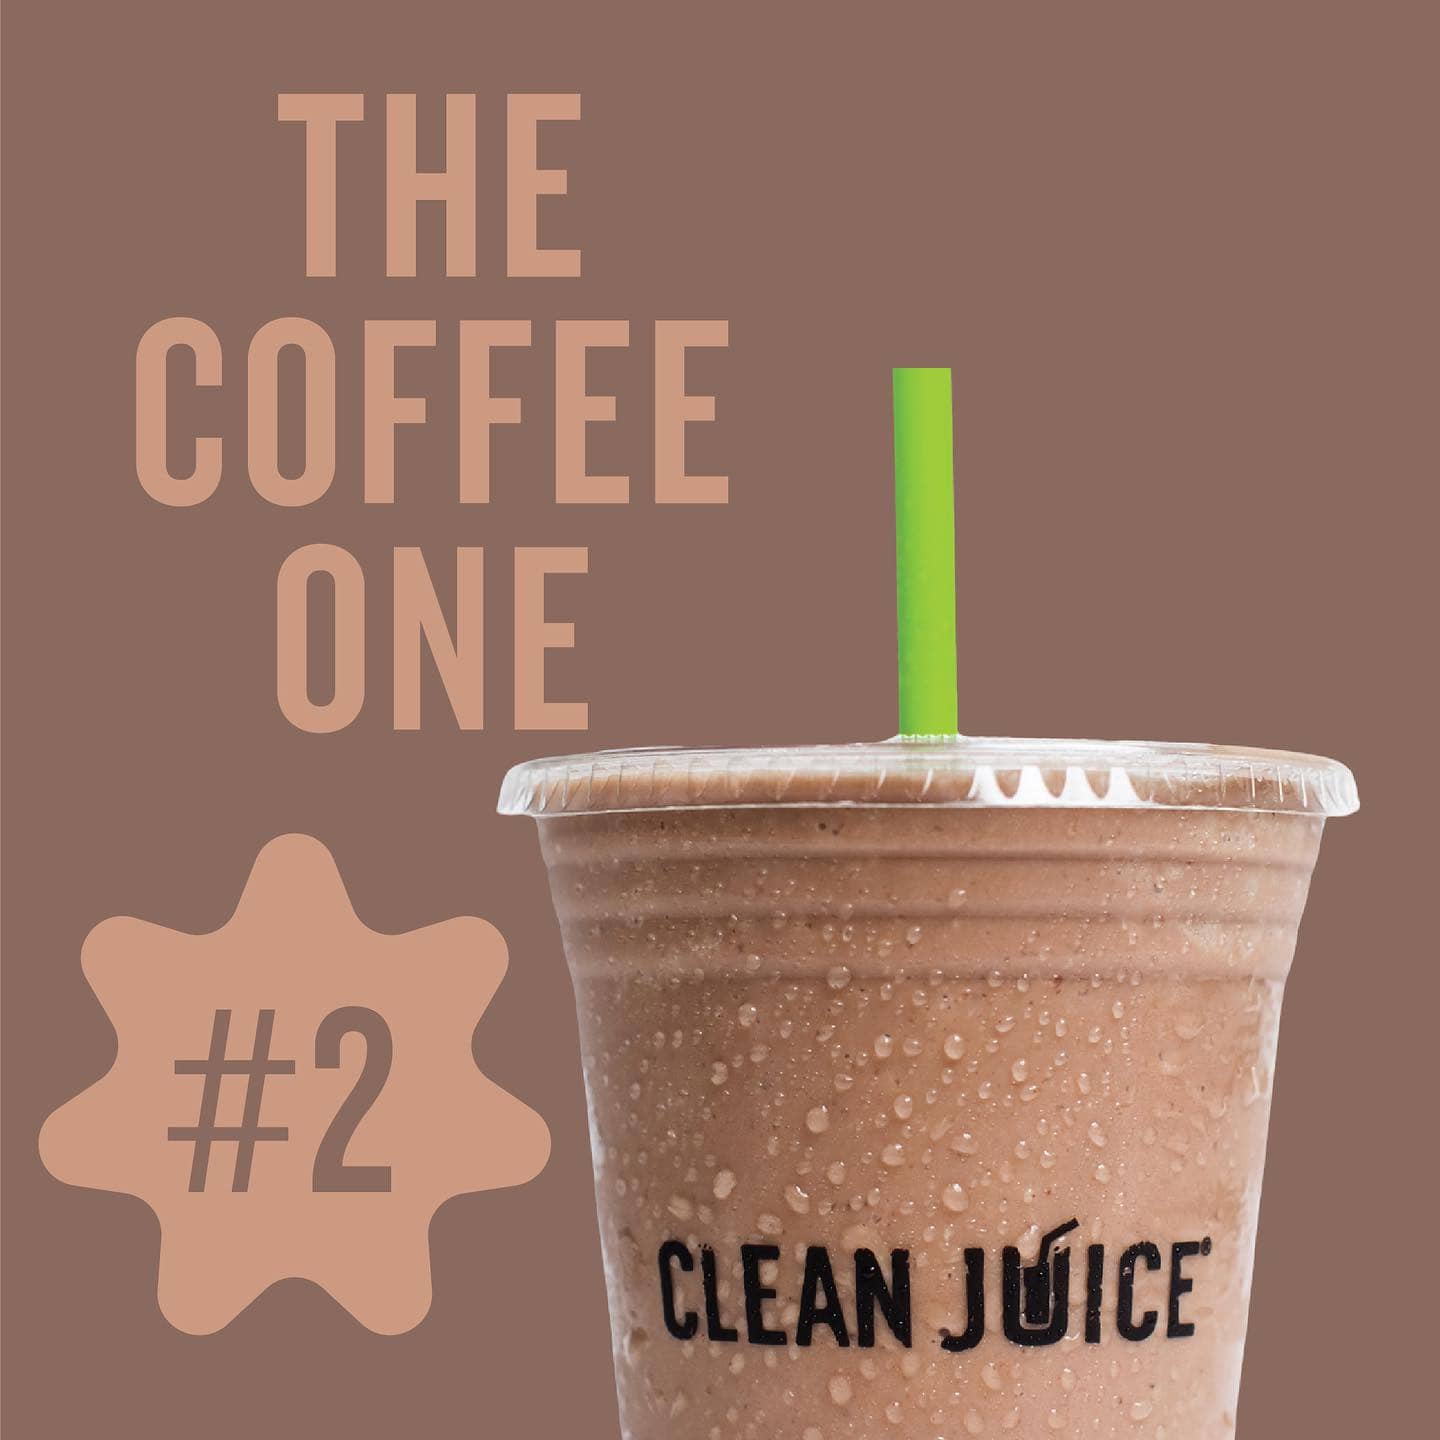 Brown The Coffee One smoothie from Clean Juice